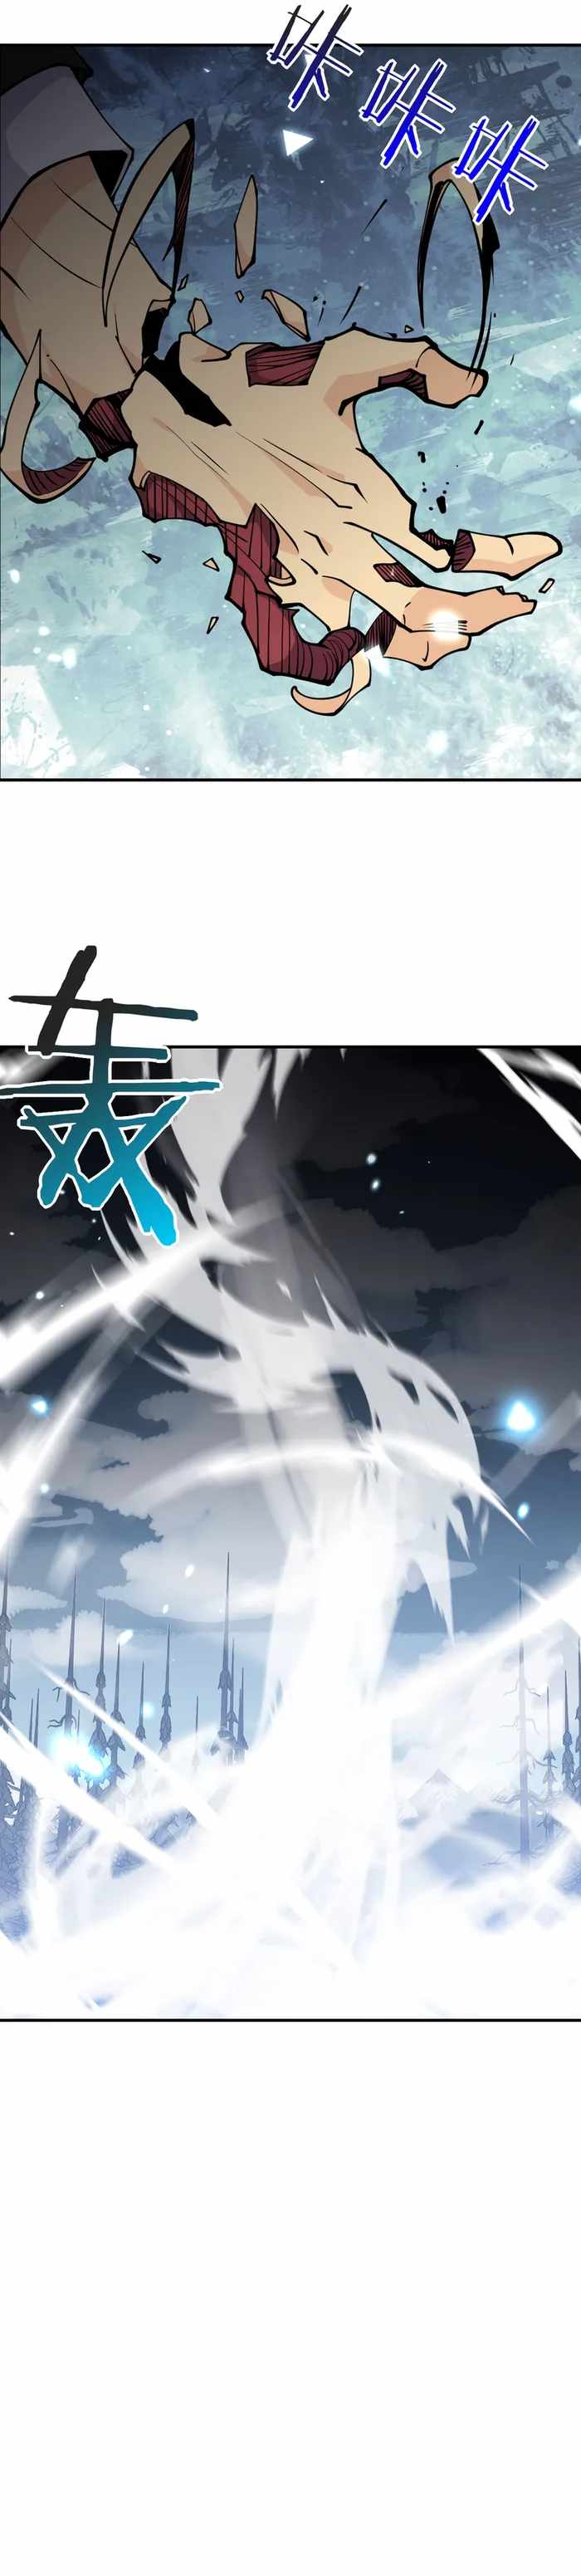 read After Signing In For 30 Days, I Can Annihilate Stars Chapter 131 Manga Online Free at Mangabuddy, MangaNato,Manhwatop | MangaSo.com